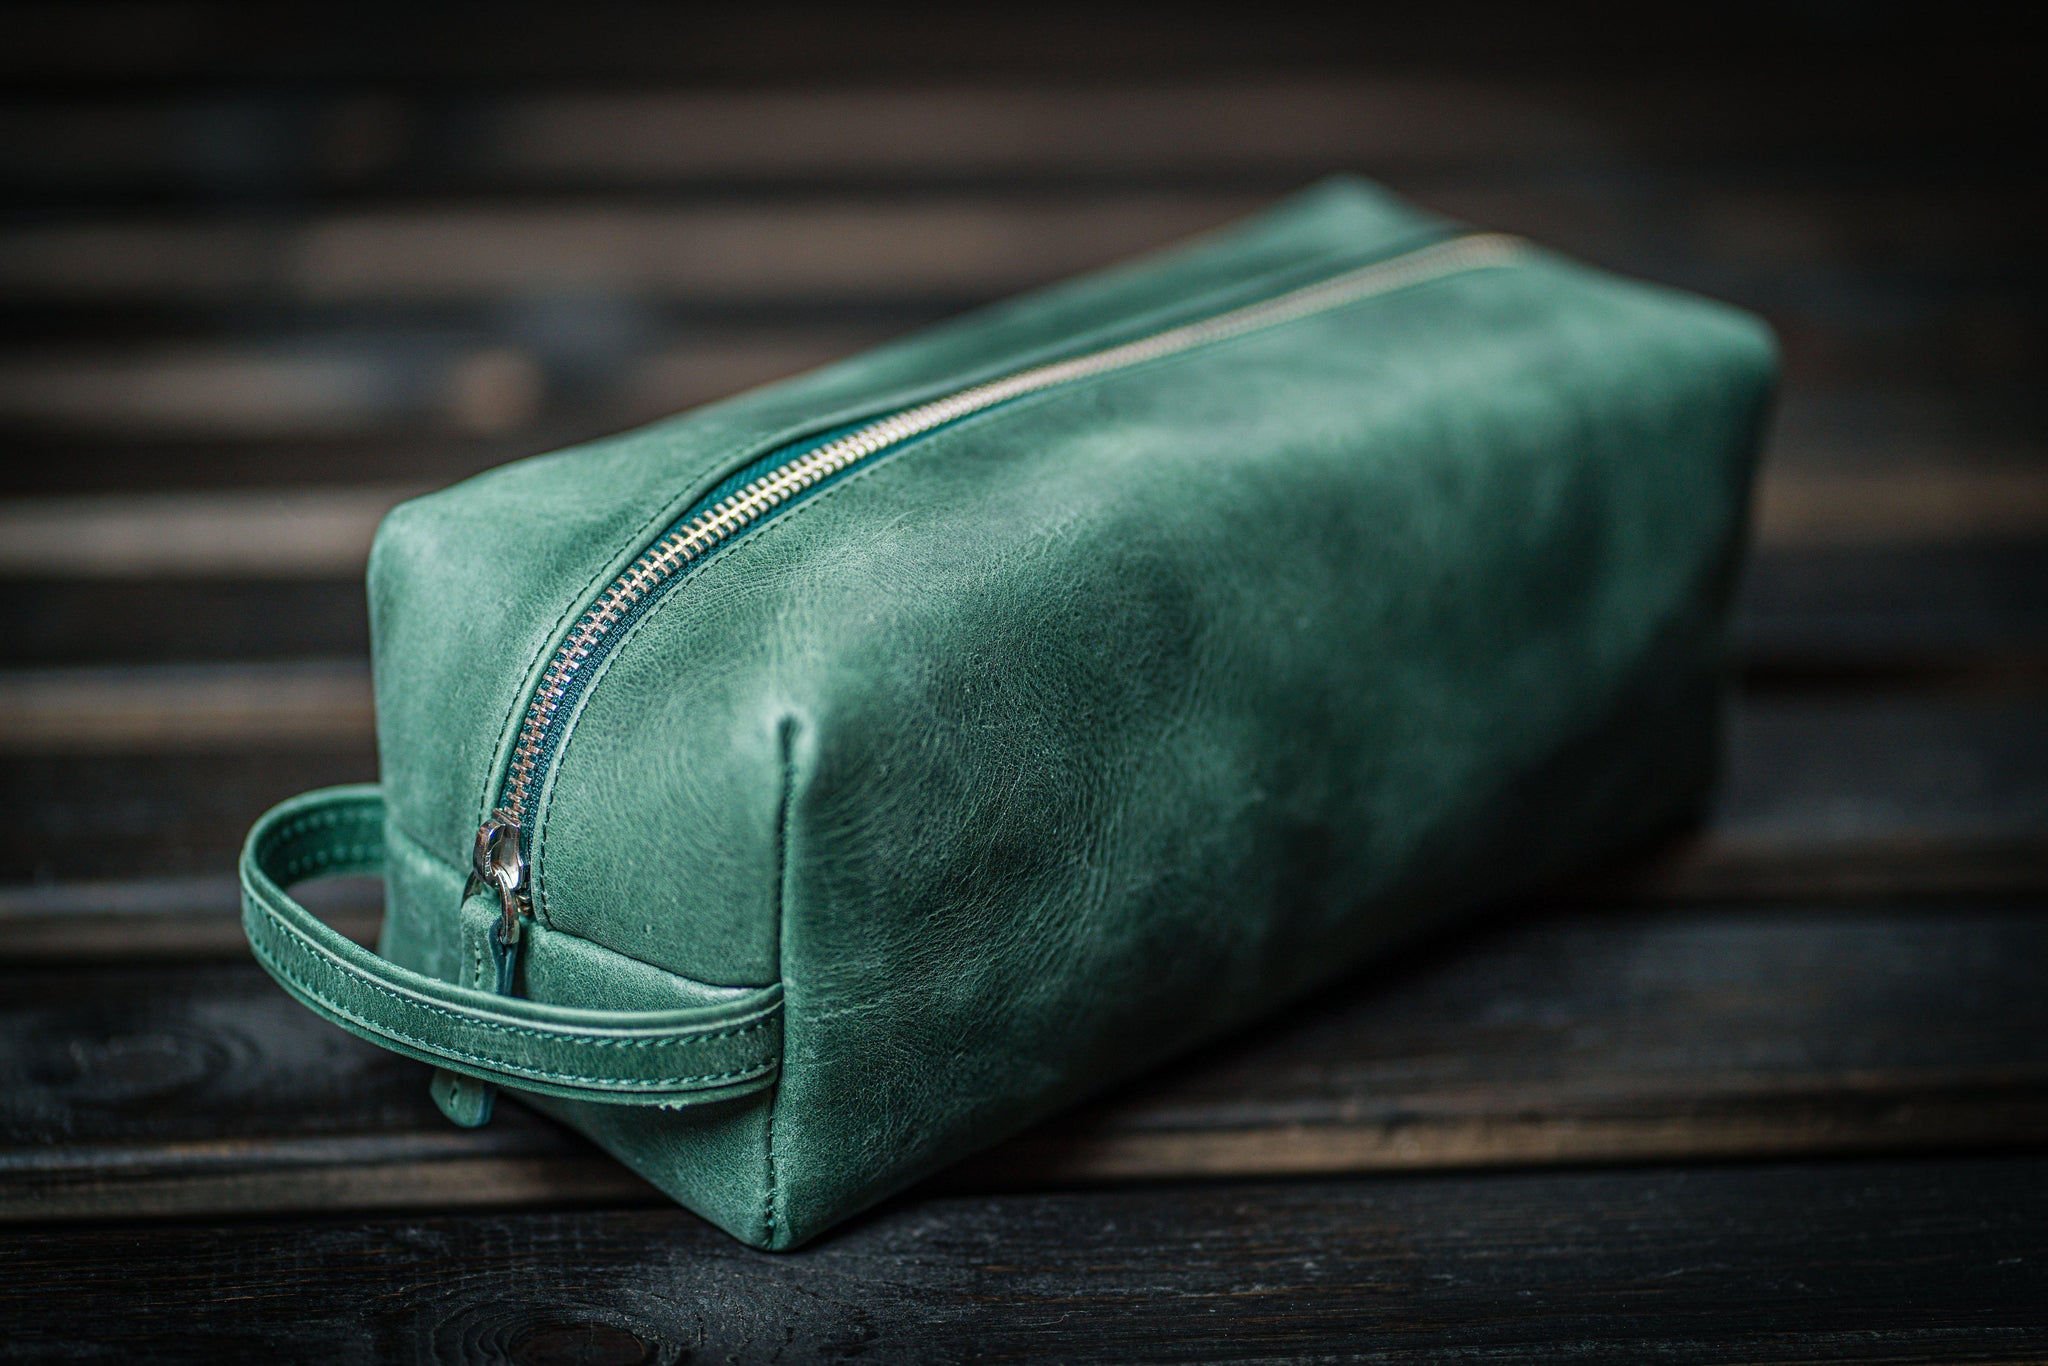 Green Leather Travel Case Toiletry Case Vanity Case 